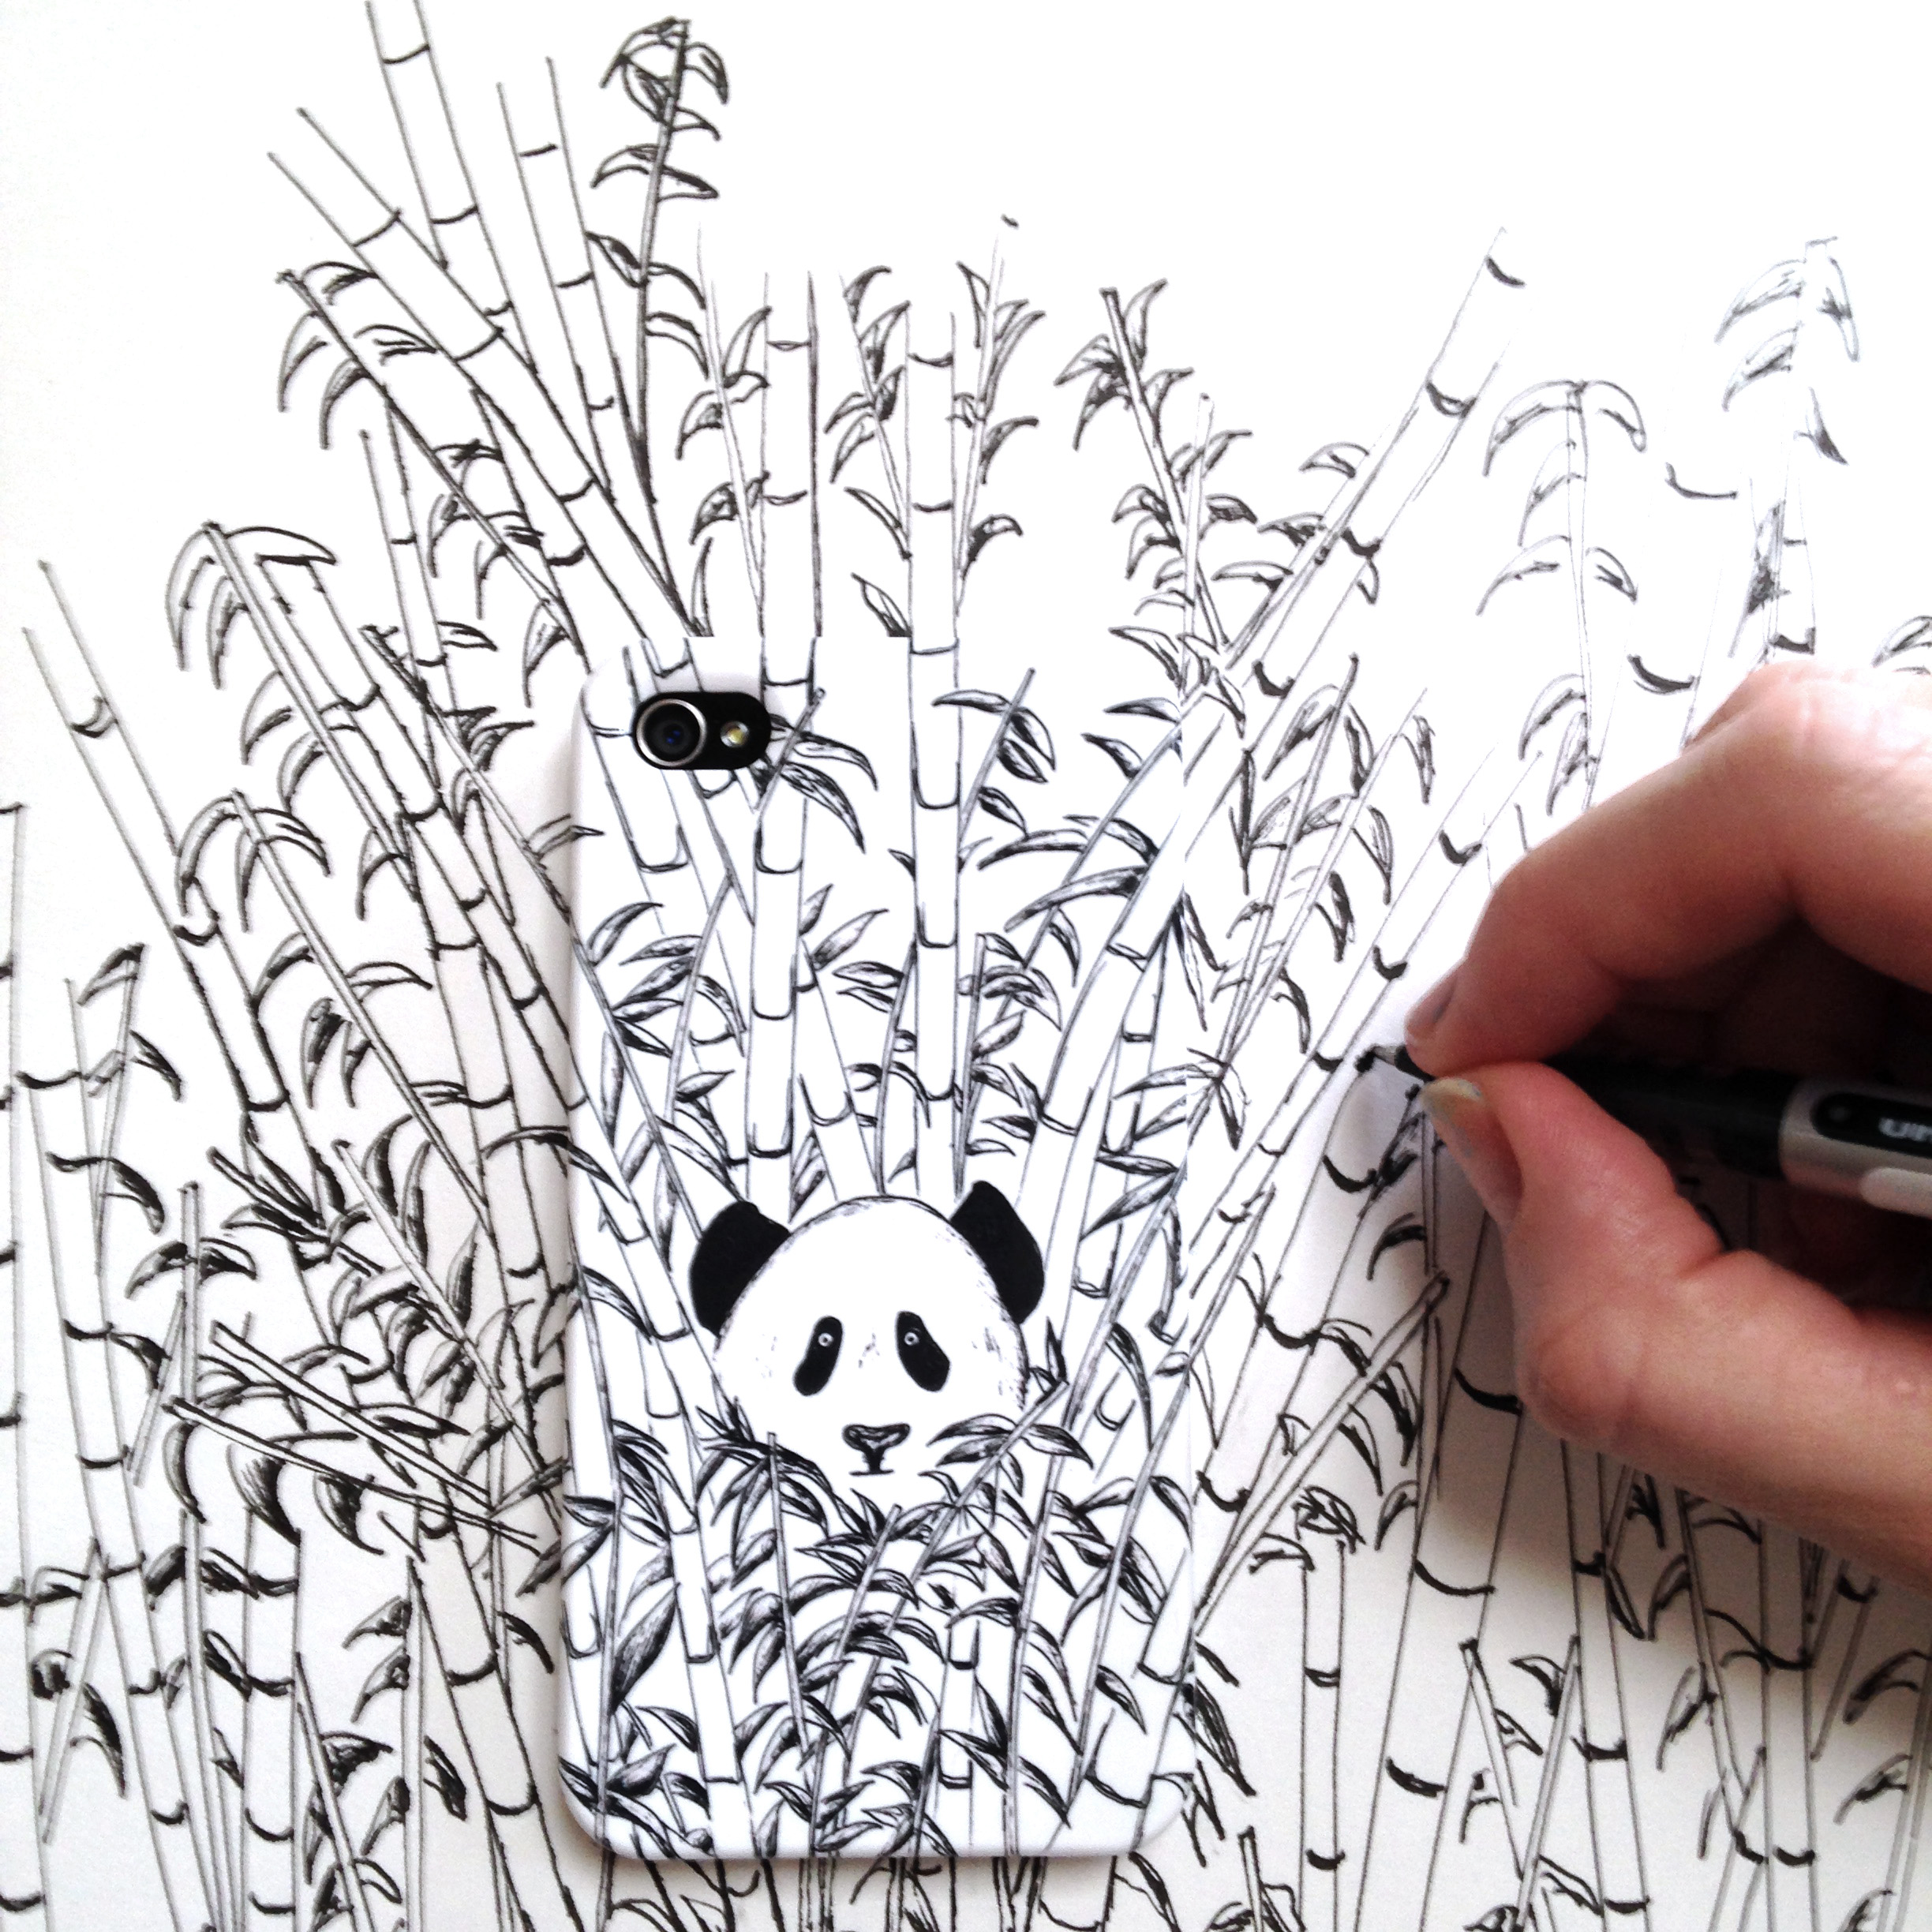 Learn how to draw a Baby Panda - EASY TO DRAW EVERYTHING